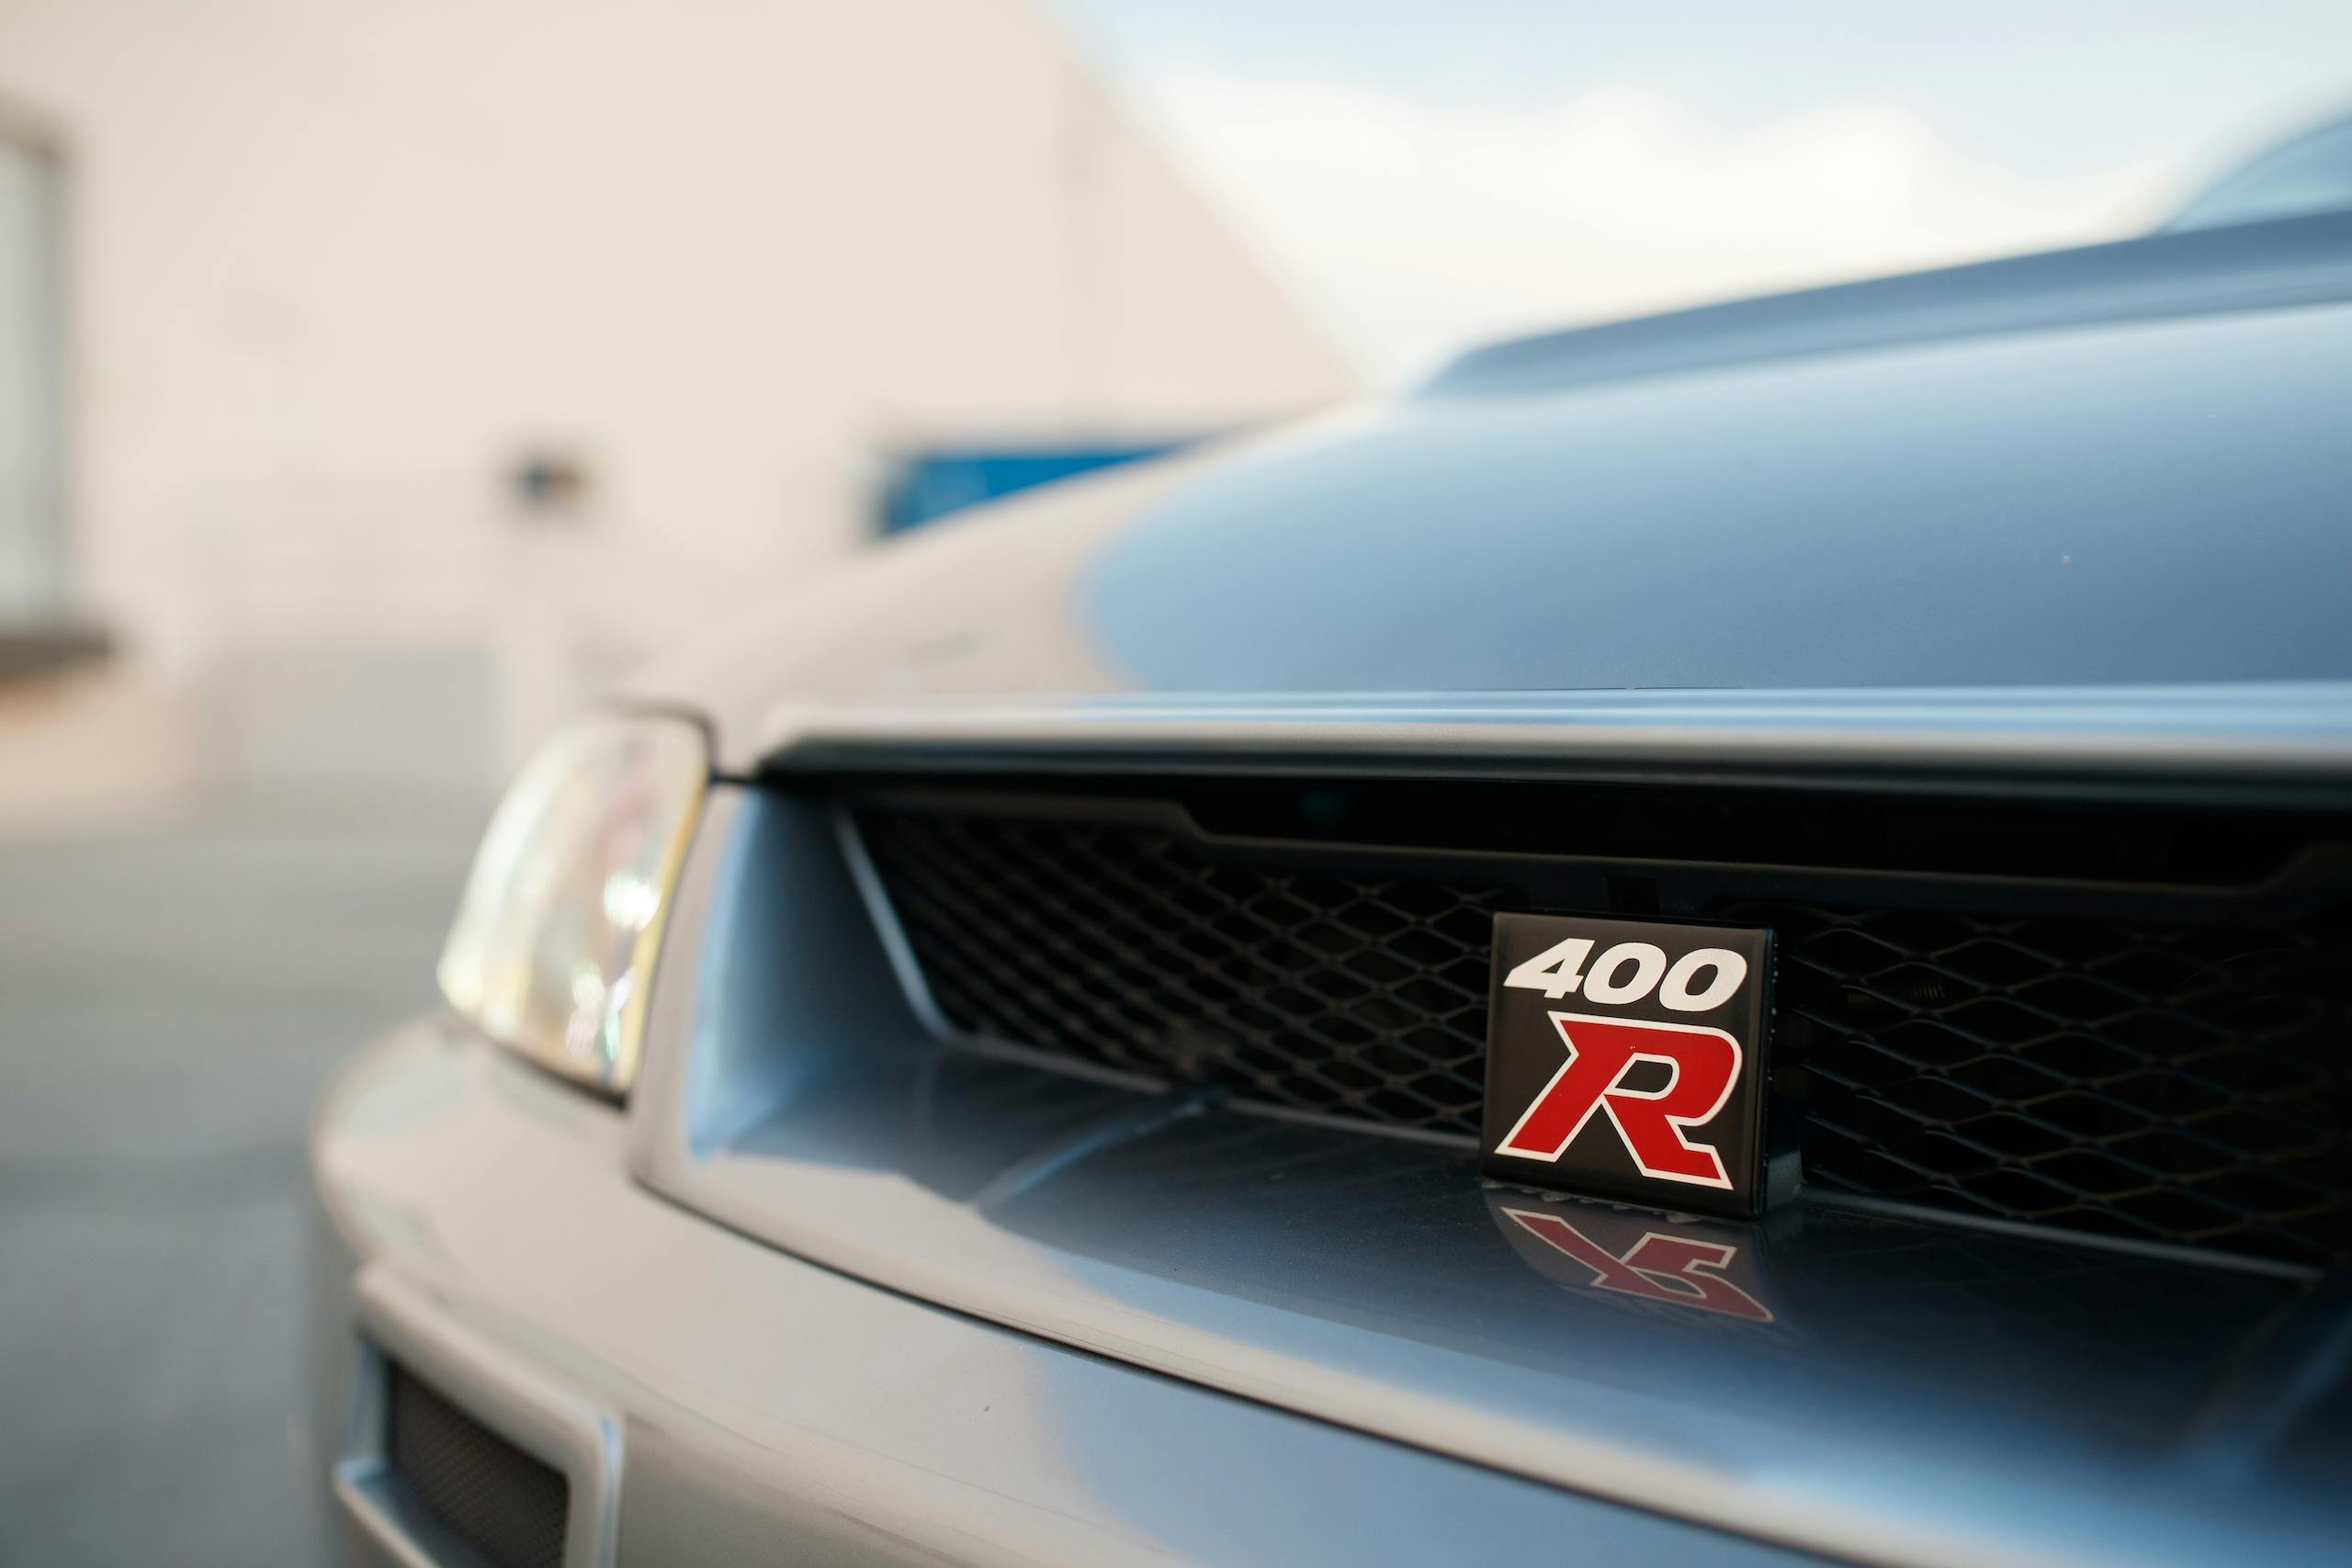 T-R NISMO 400R front end grille logo